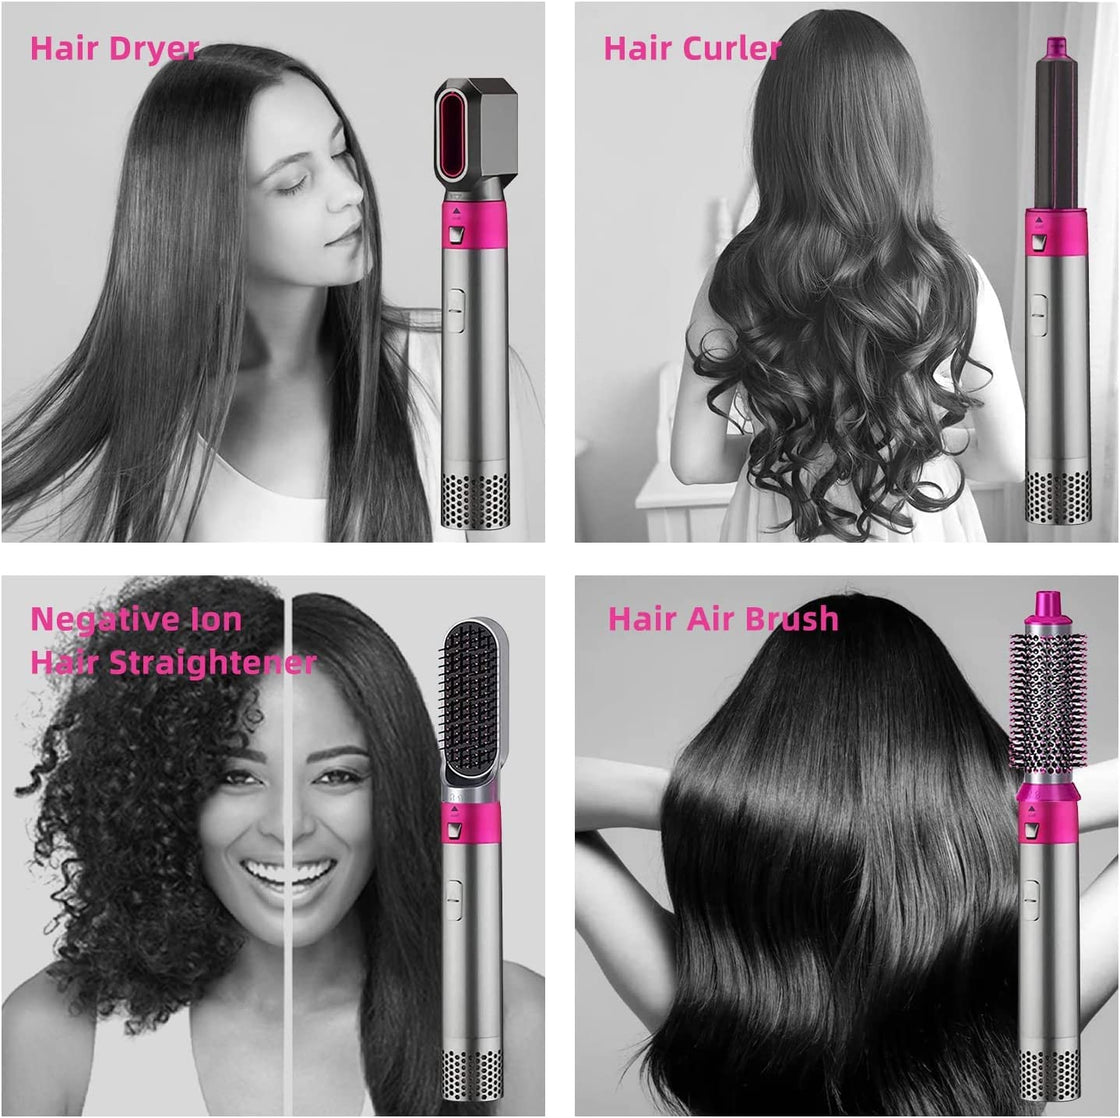 5 in 1 Hot Air Styler Hair straightener Dryer Comb Multifunctional Styling Tool for Curly Hair brush straightener for women Straightening Curling Drying Combing Scalp Massage Styling